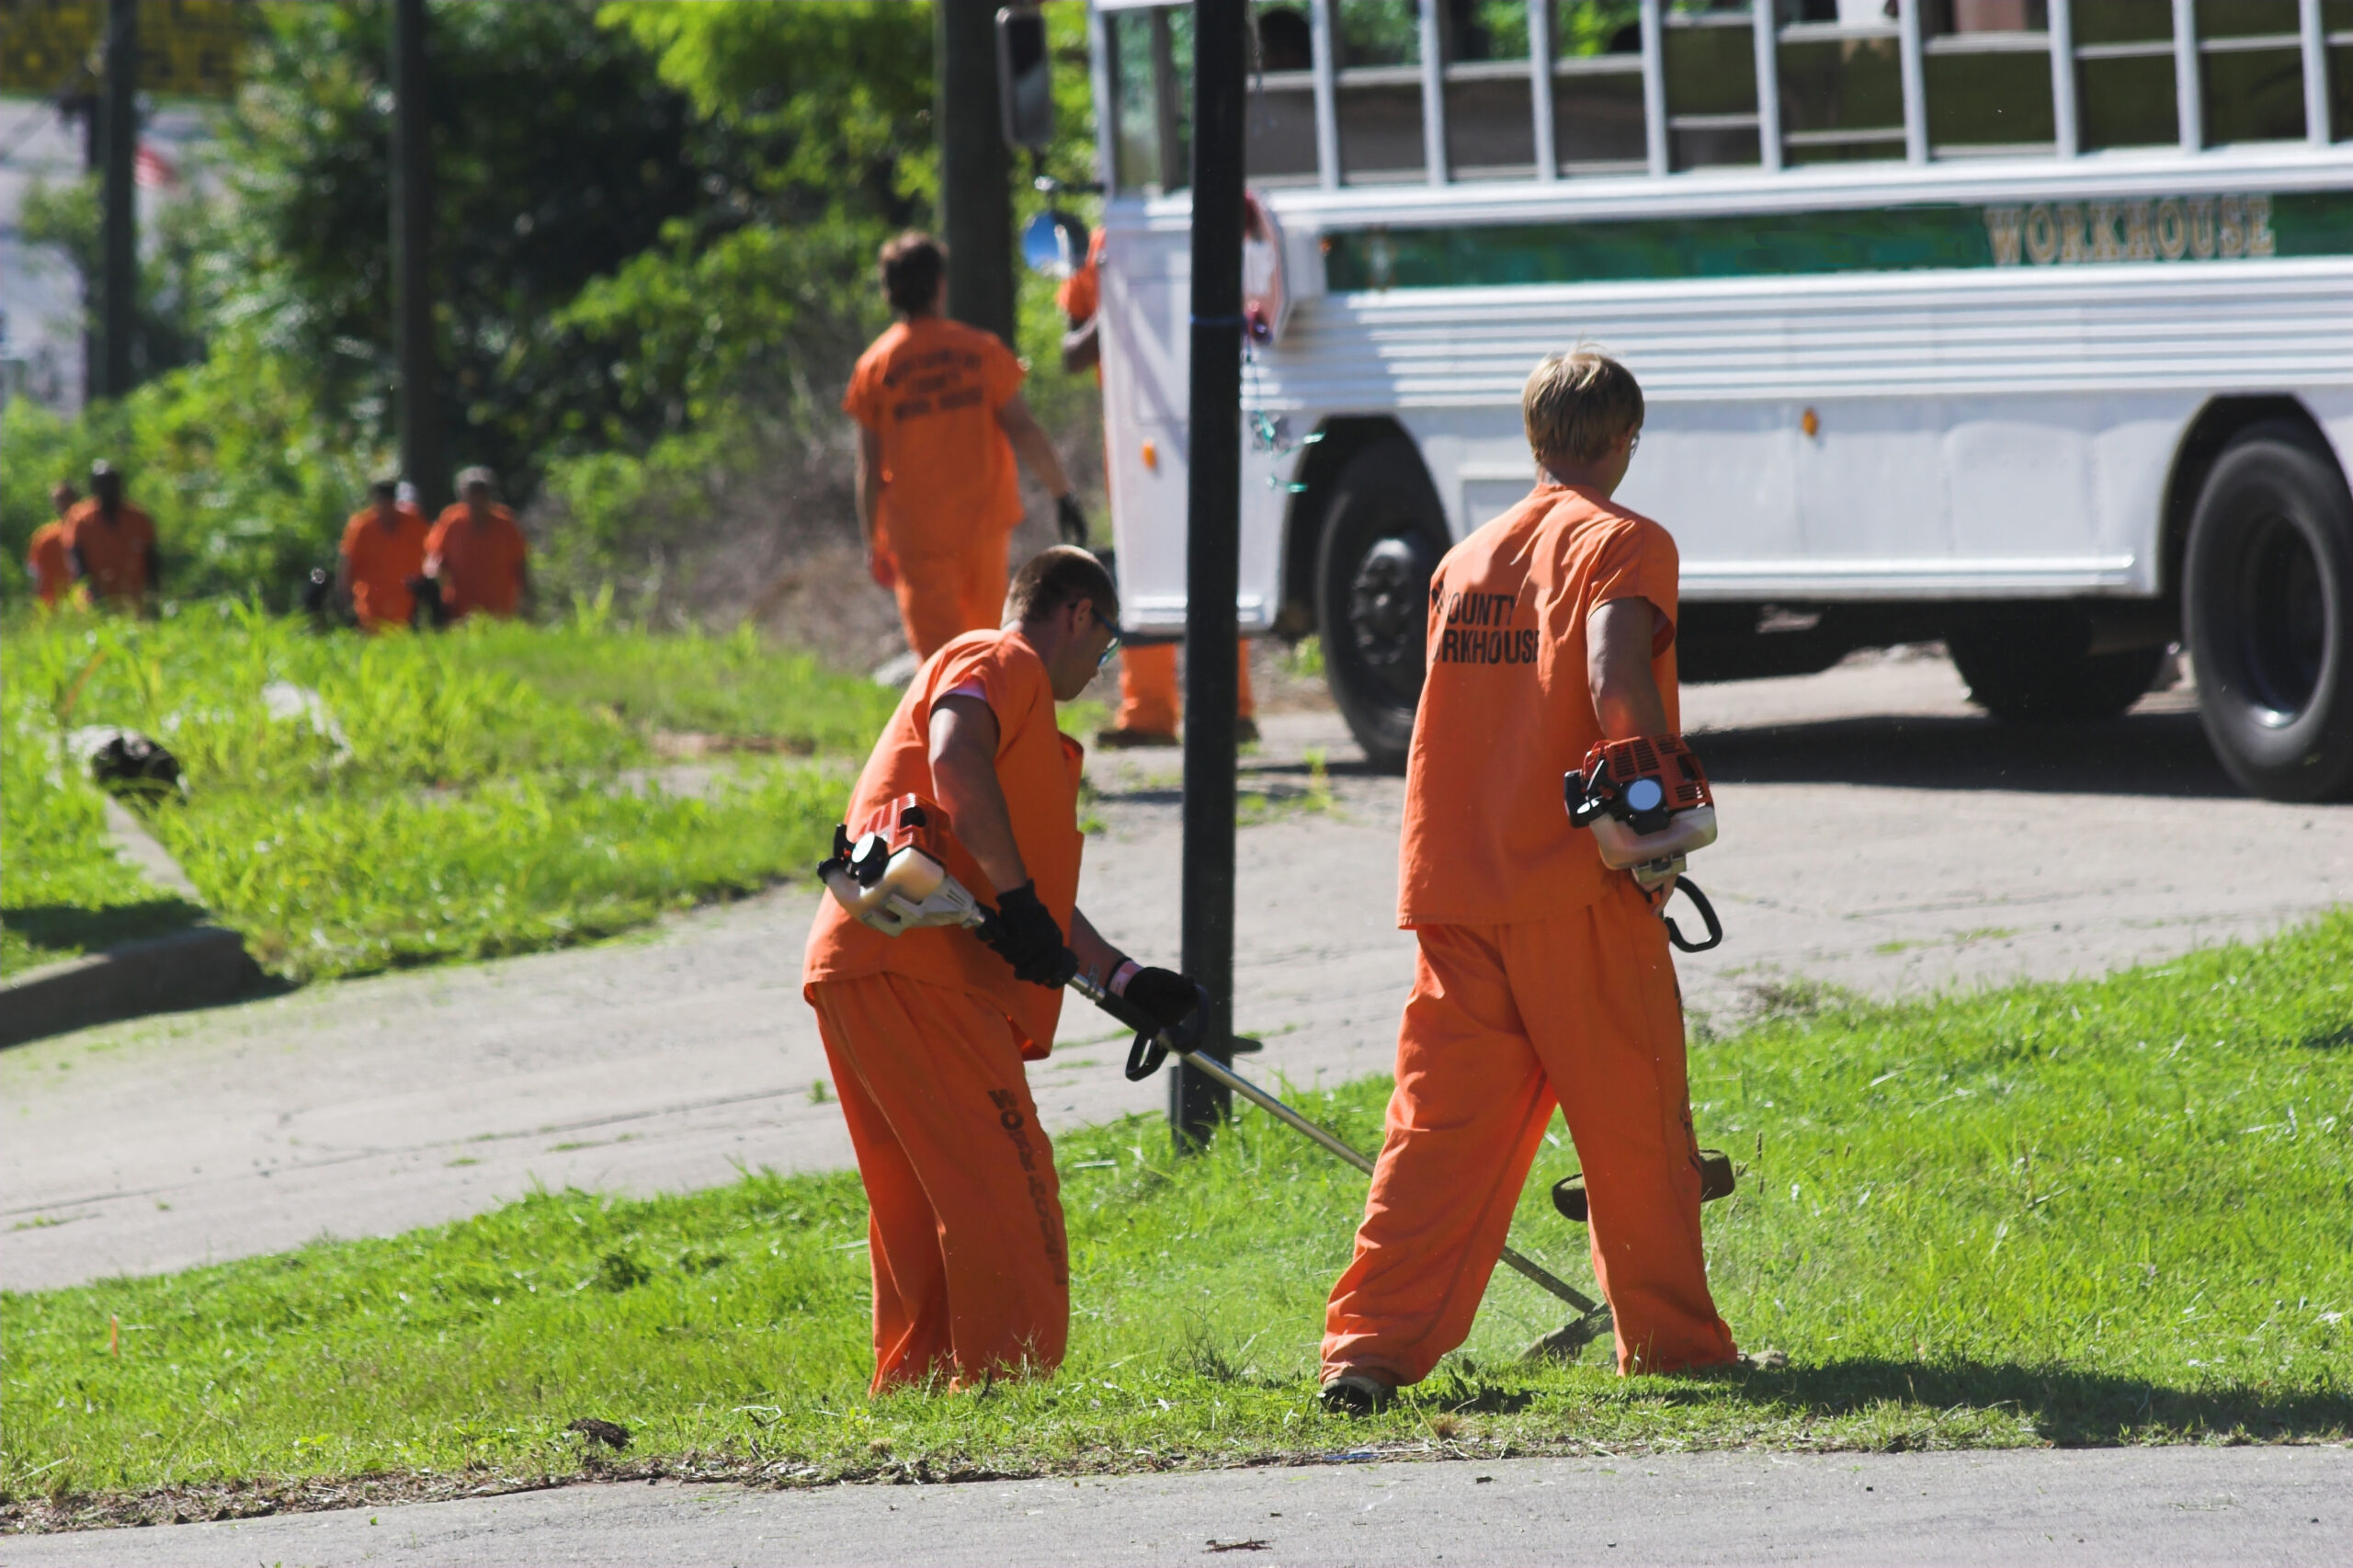 Prisoners out doing weed eating and litter pickup along side roadway